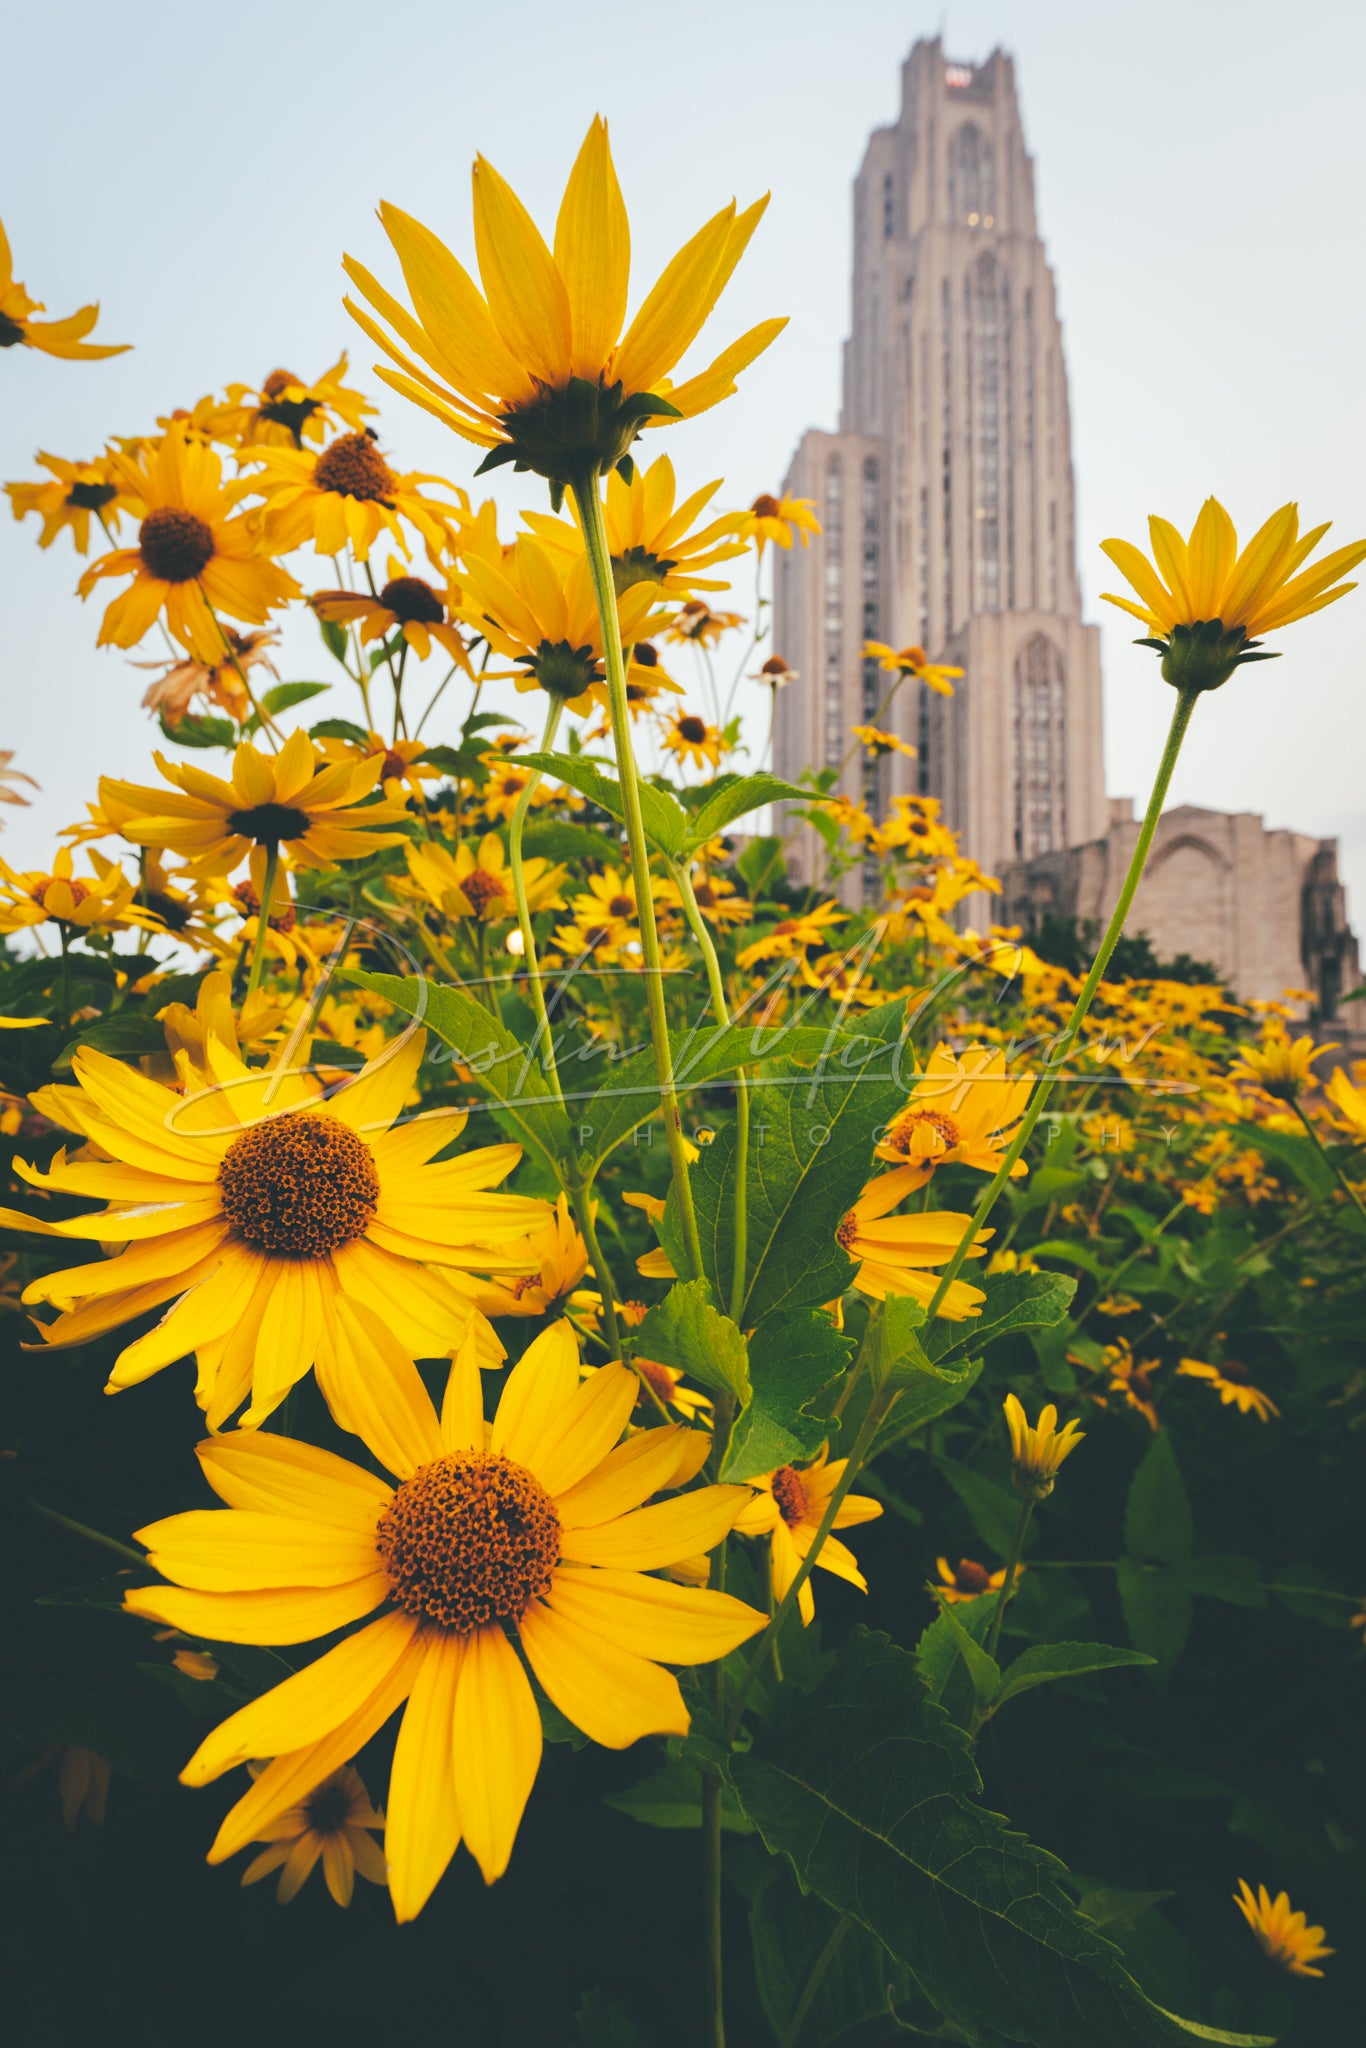 Flowers Surround the Cathedral of Learning